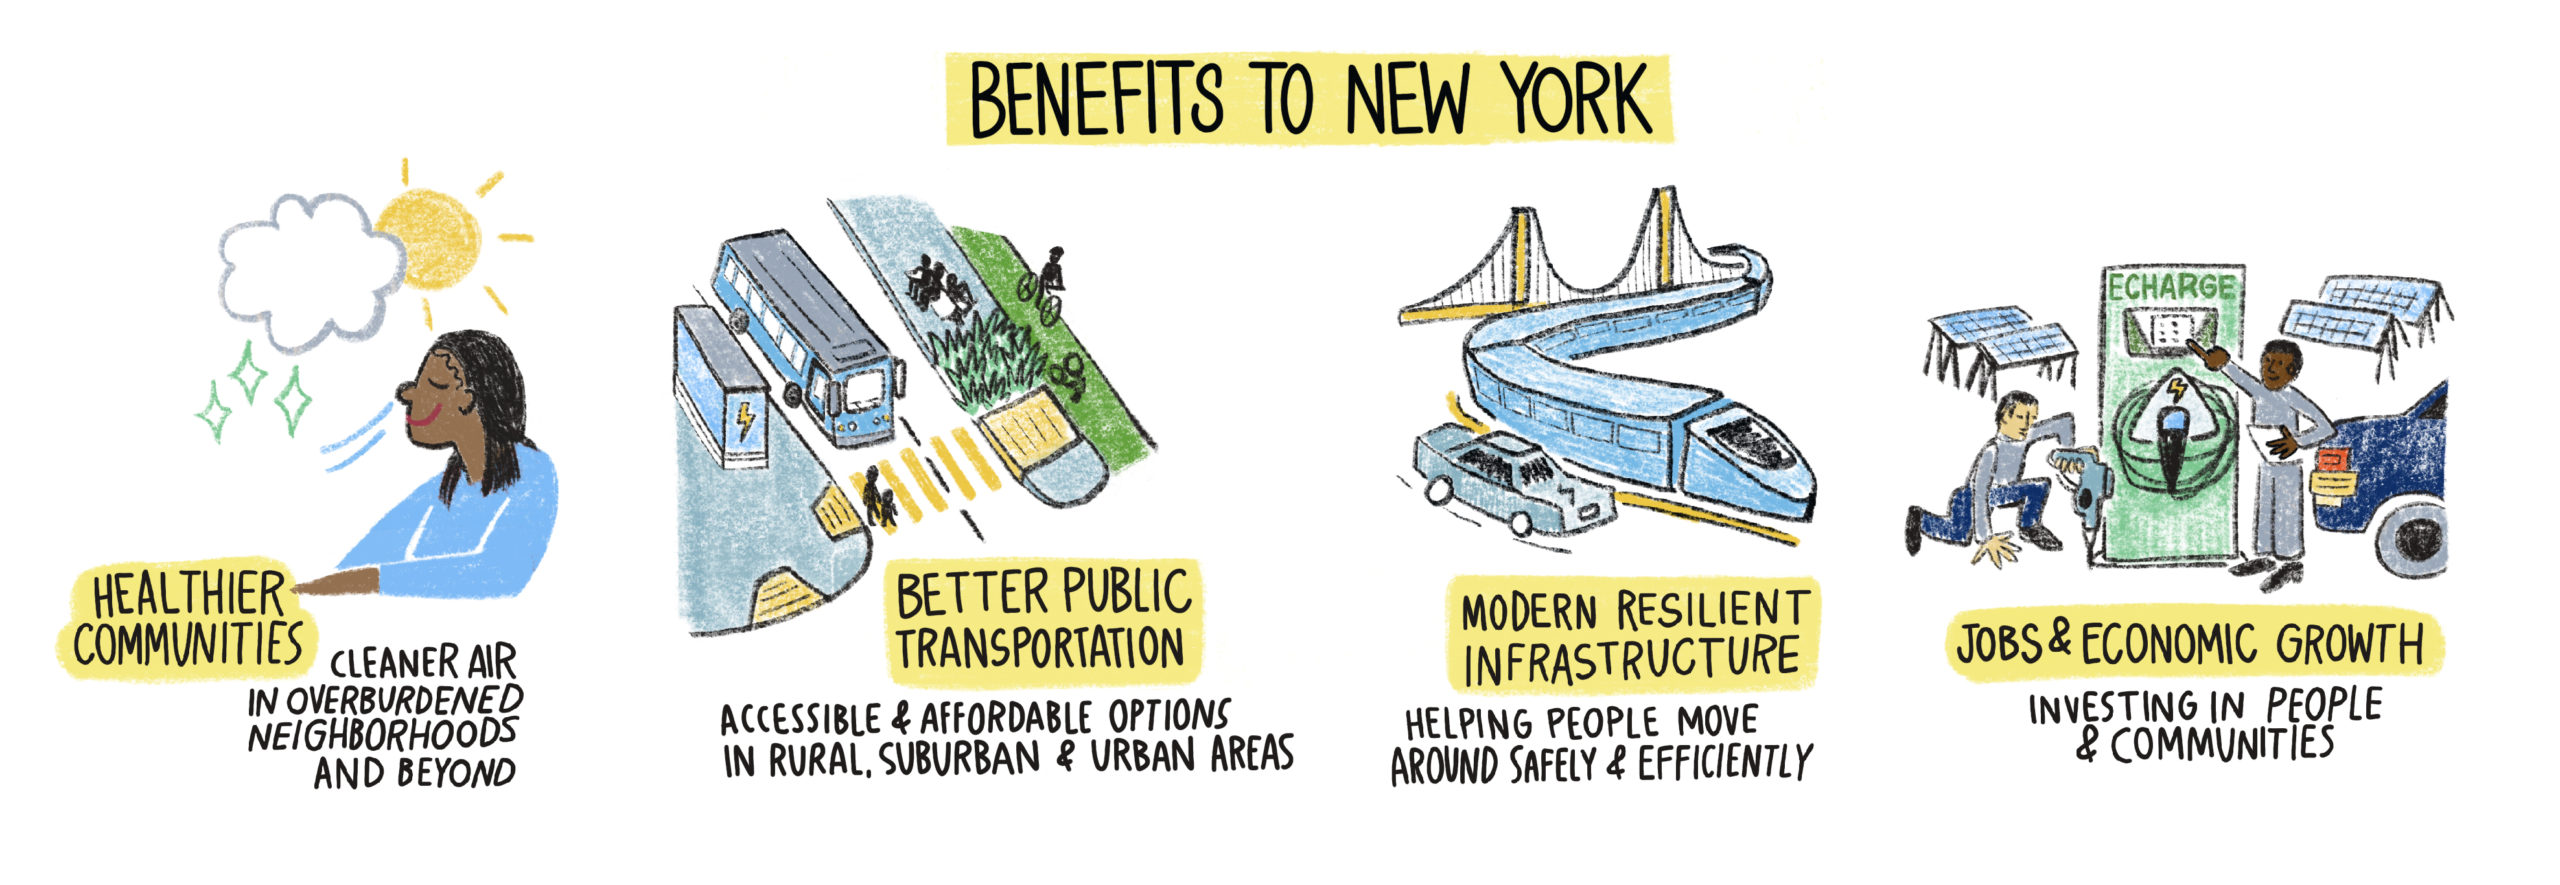 New Yorkers for the Transportation and Climate Initiative - Benefits to New York